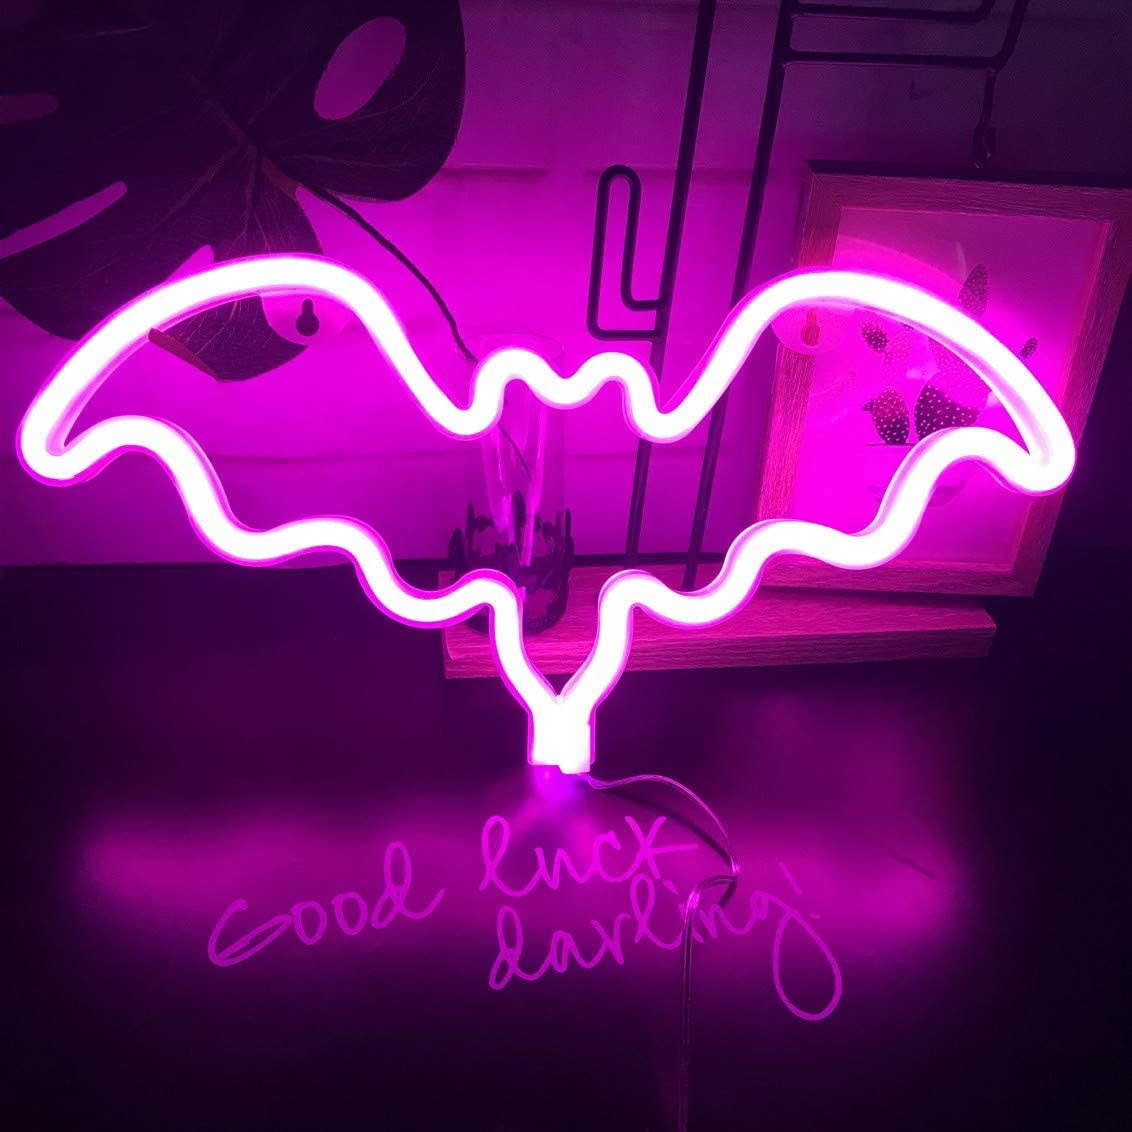 Fiee Pink Bat Shaped Neon Signs, Led Safety Halloween Art Wall Decoration Lights Neon Lights Night Table Lamp With Battery Powered USB For Kids Gift, Baby Room, Wedding, Home (Bat Pink), Everything Else